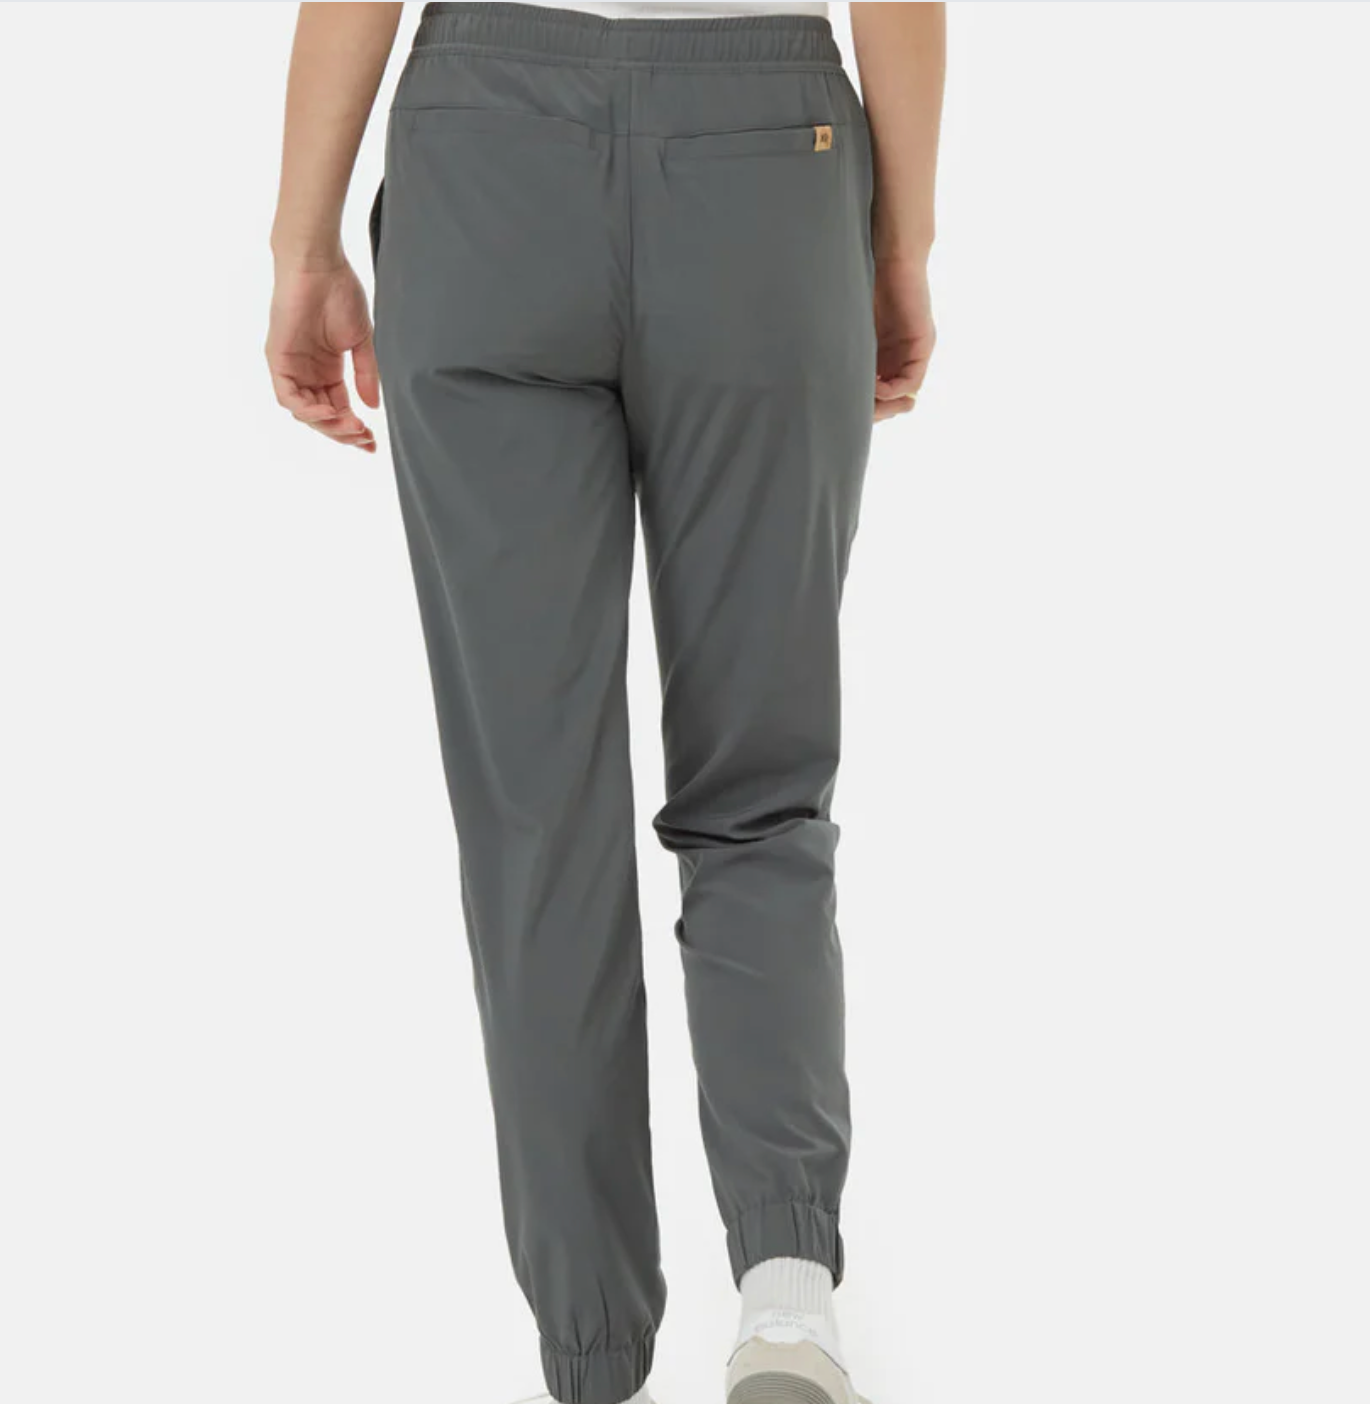 WOMEN'S IN-MOTION PACIFIC JOGGER PANT